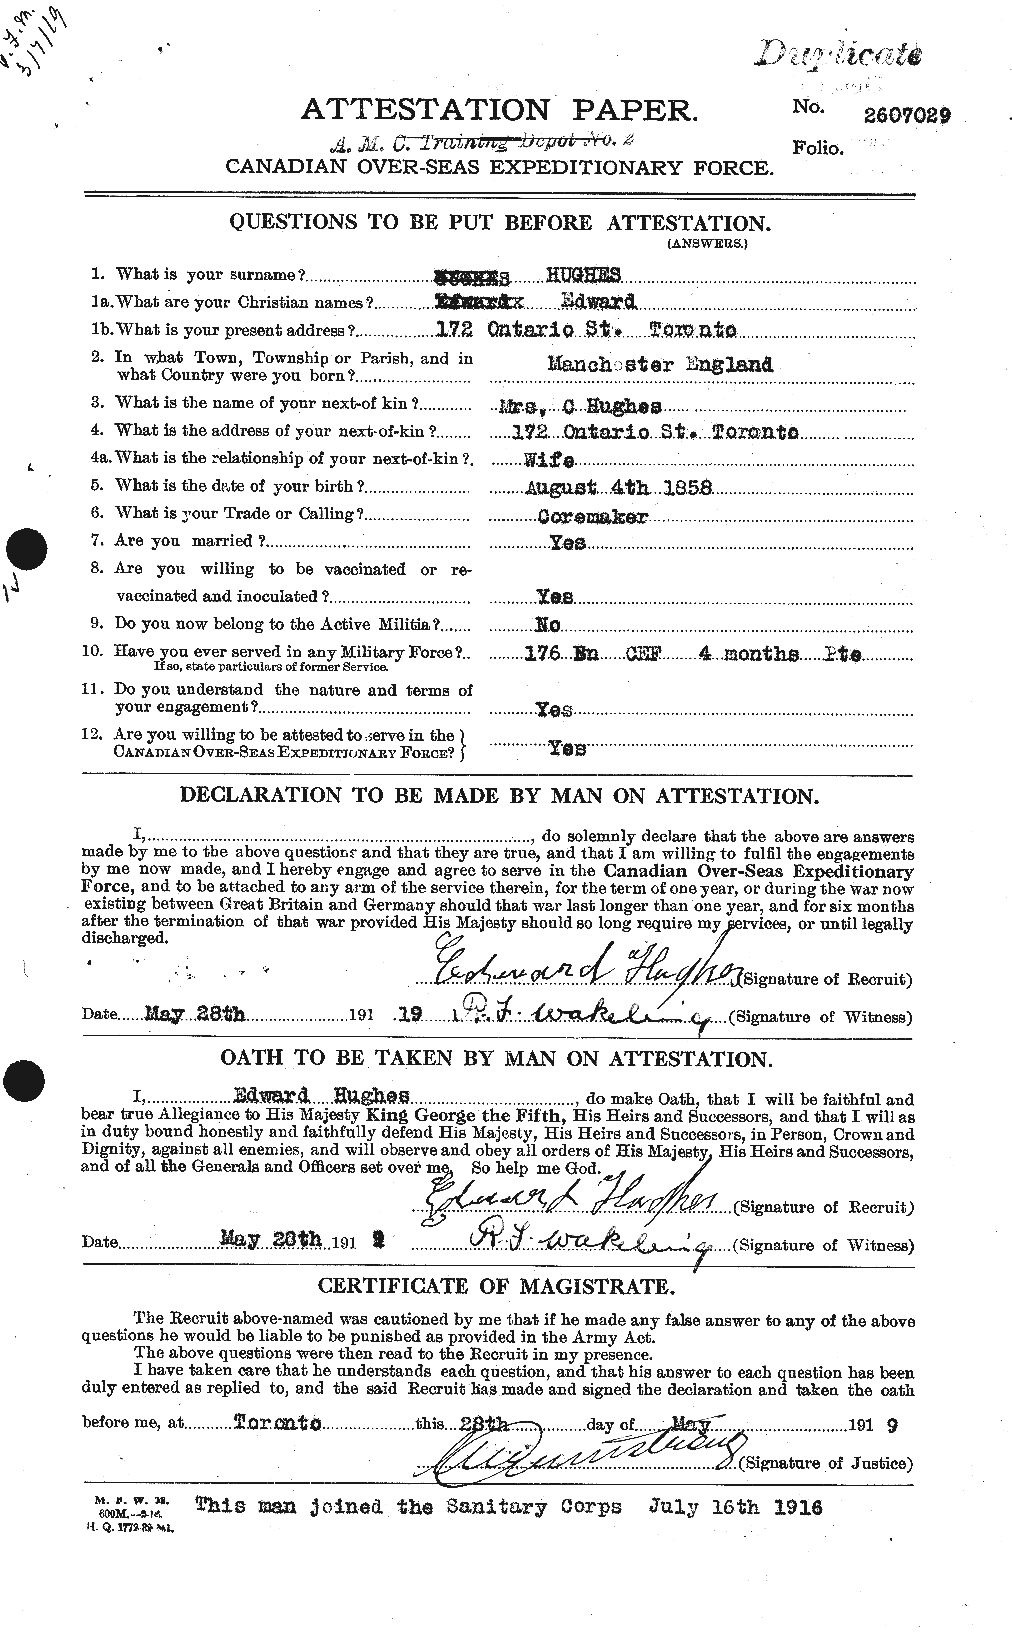 Personnel Records of the First World War - CEF 402676a